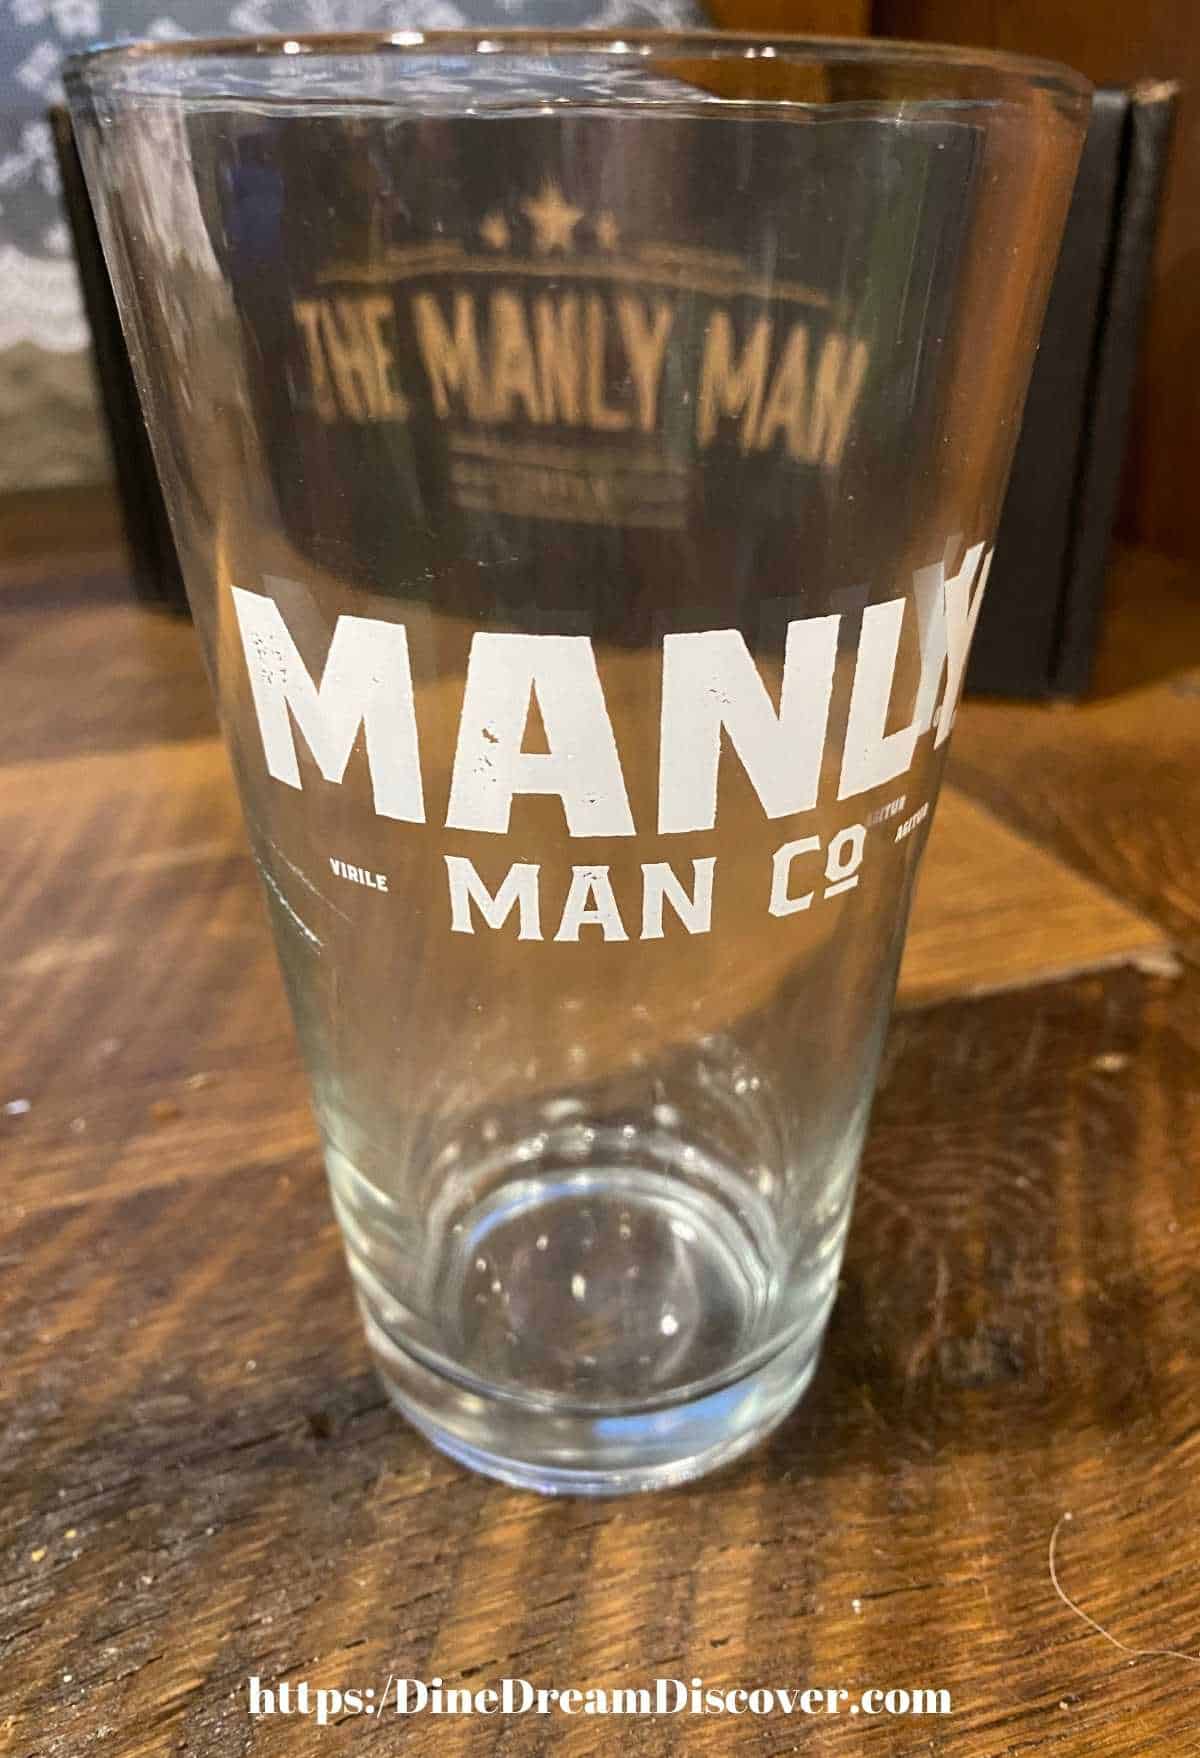 The Manly Man Co.